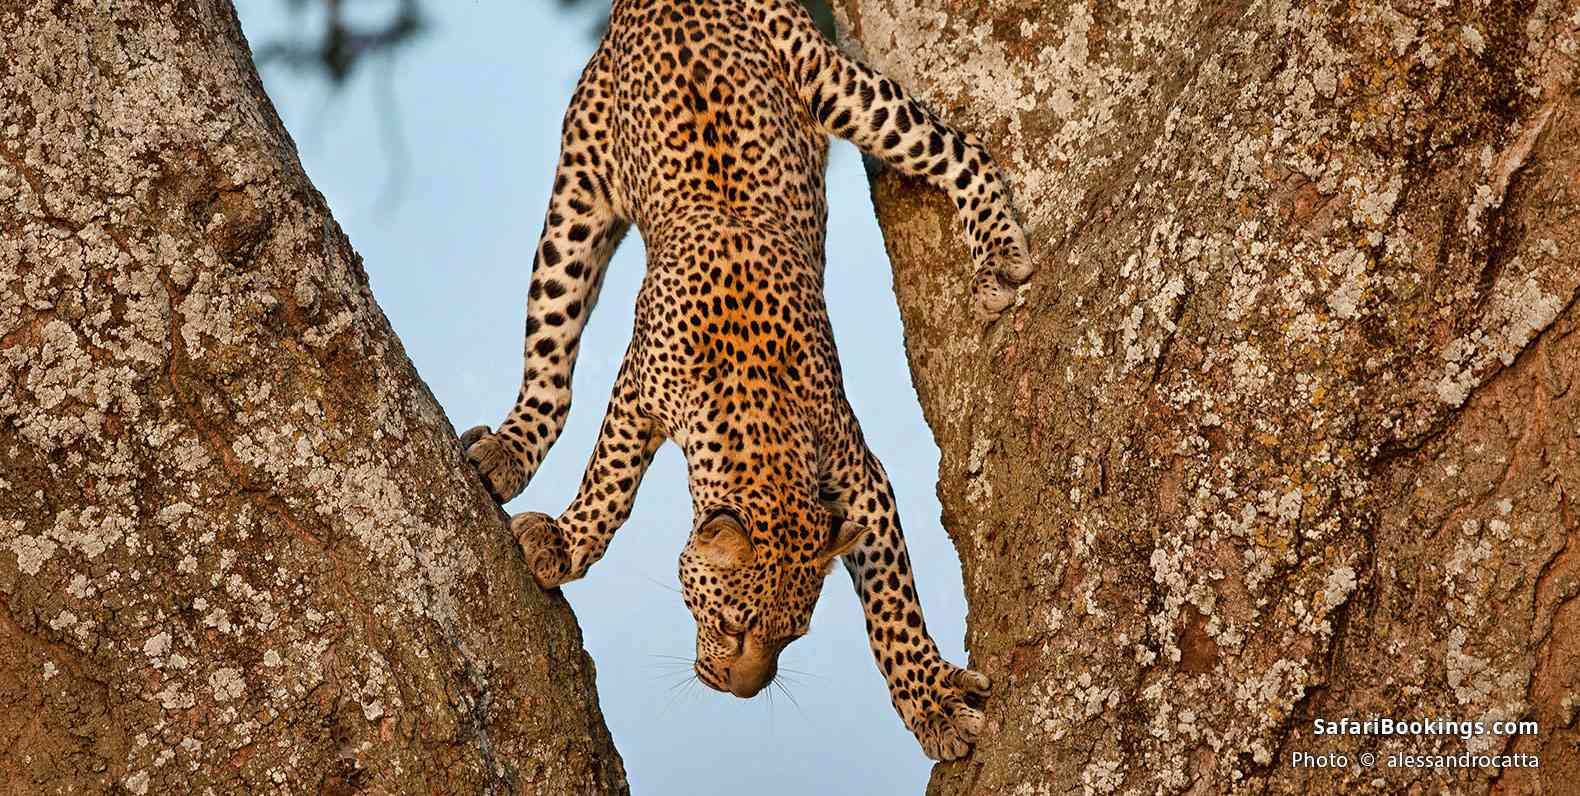 Leopard climbing down a tree in Serengeti National Park